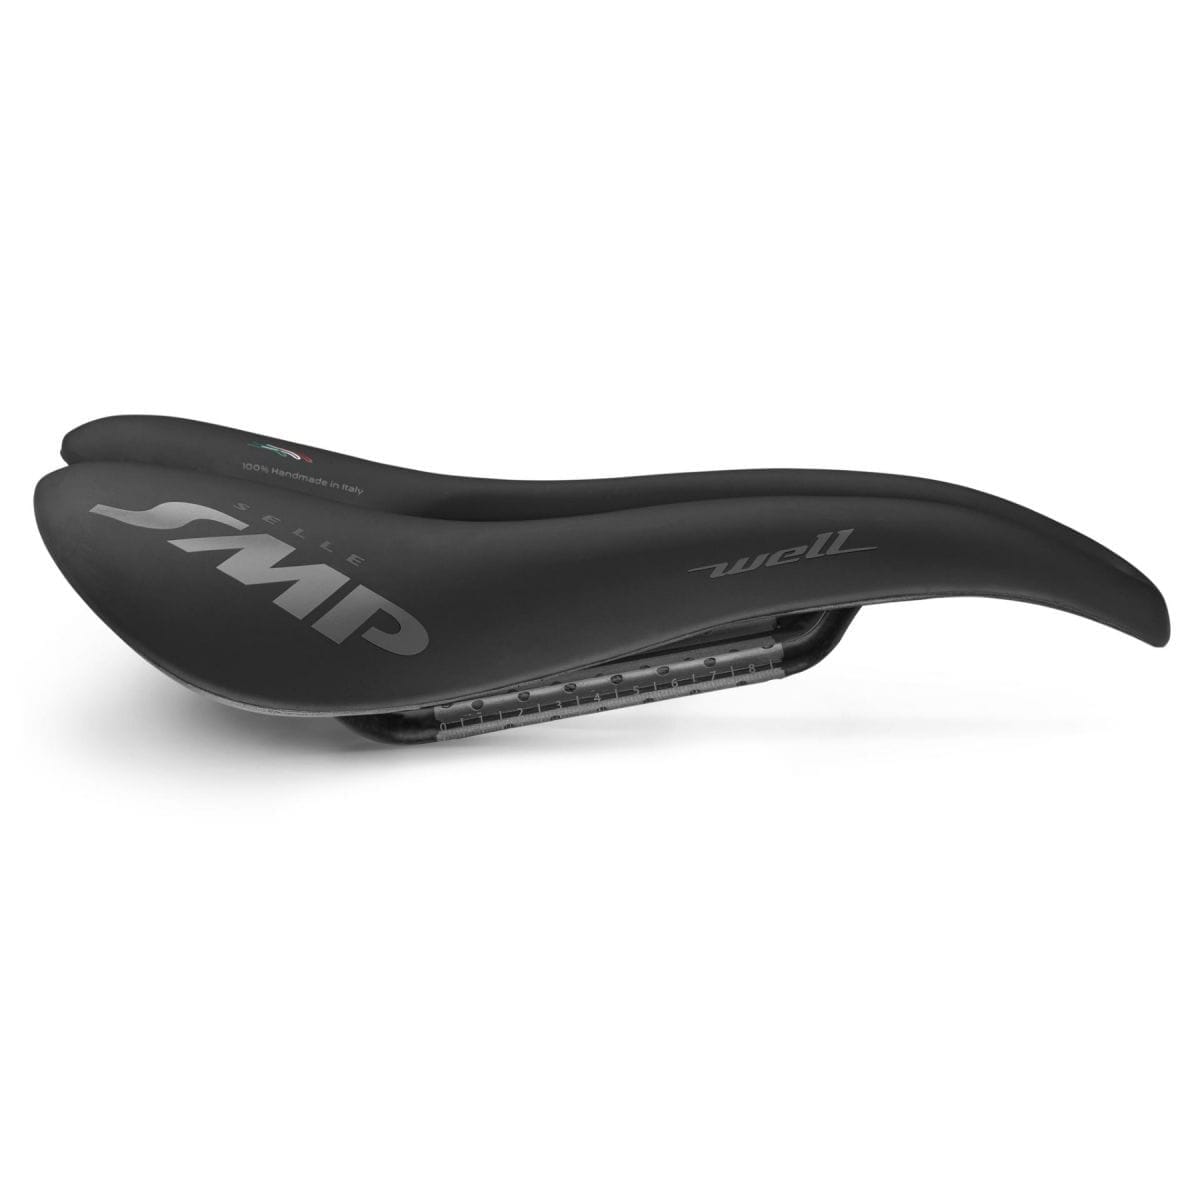 Selle SMP WELL GEL largeur 144mm rails carbone